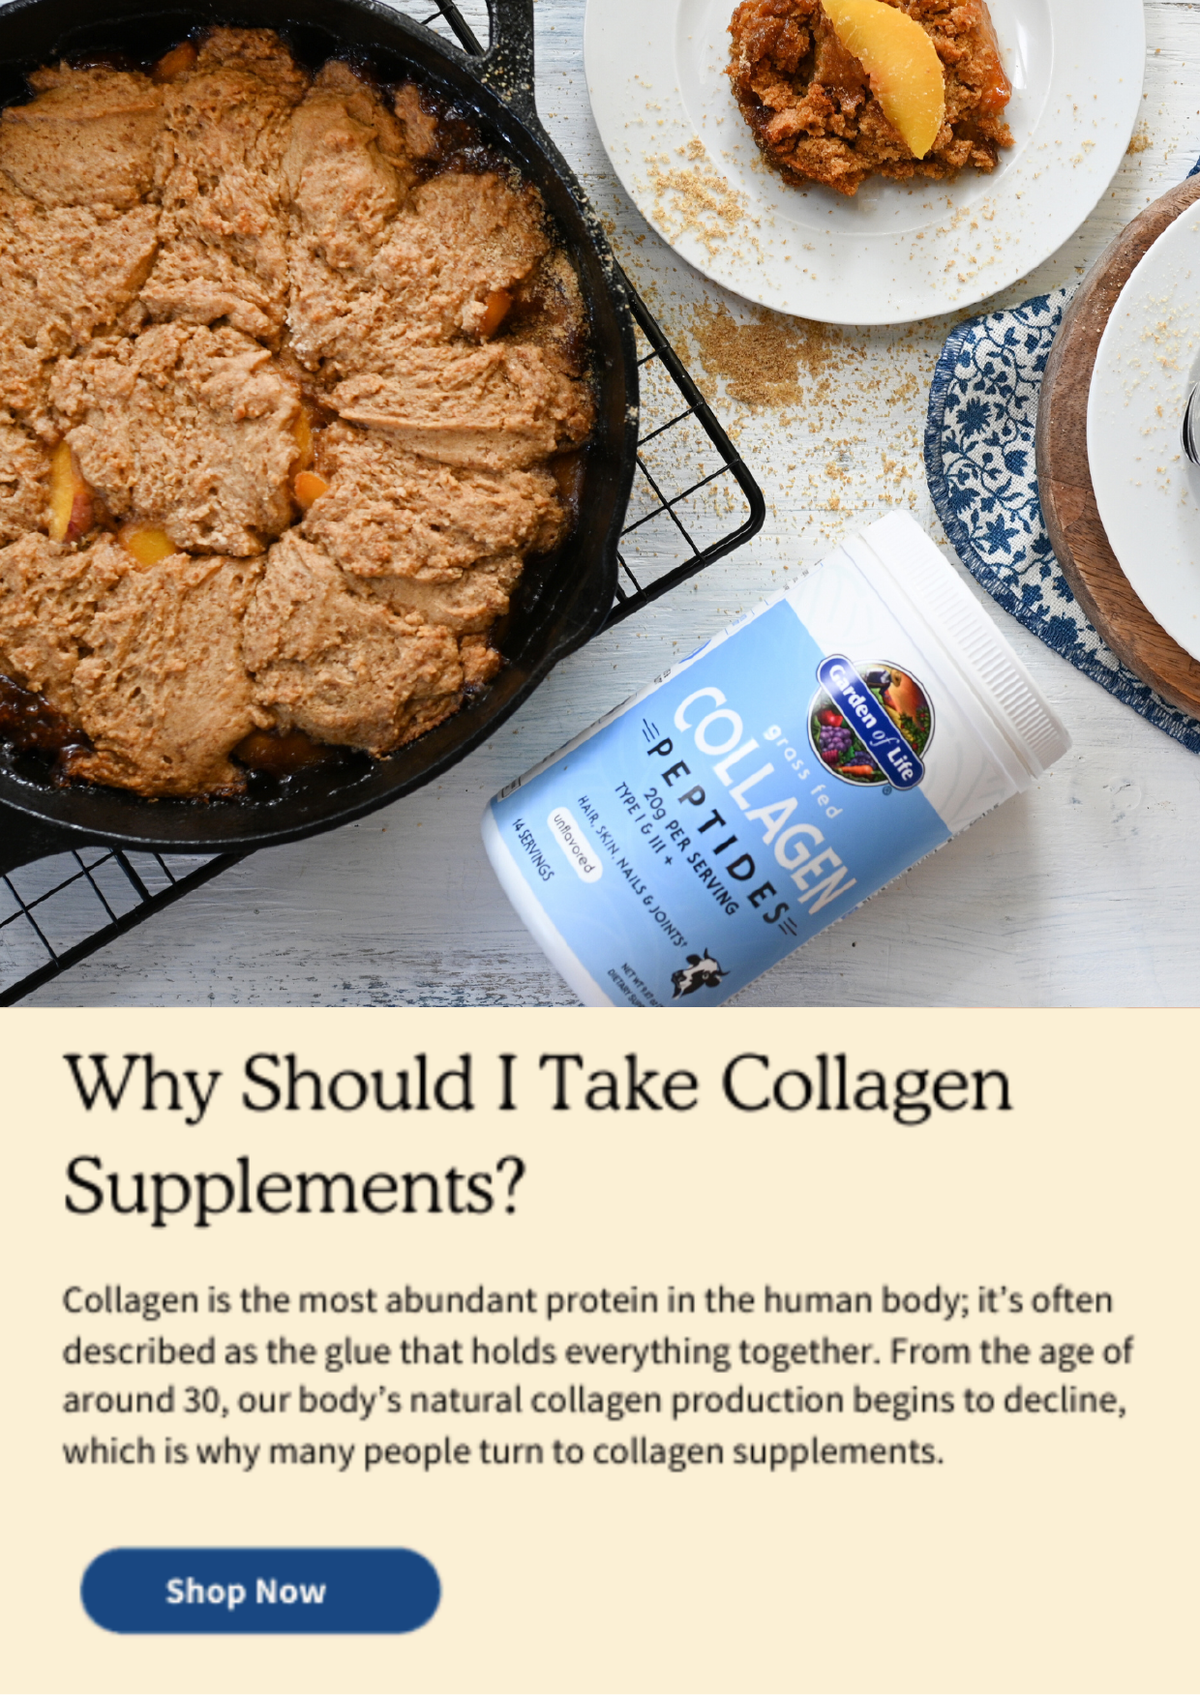 Why Should I Take Collagen Supplements? Collagen is the most abundant protein in the human body; it’s often described as the glue that holds everything together. From the age of around 30, our body’s natural collagen production begins to decline, which is why many people turn to collagen supplements.